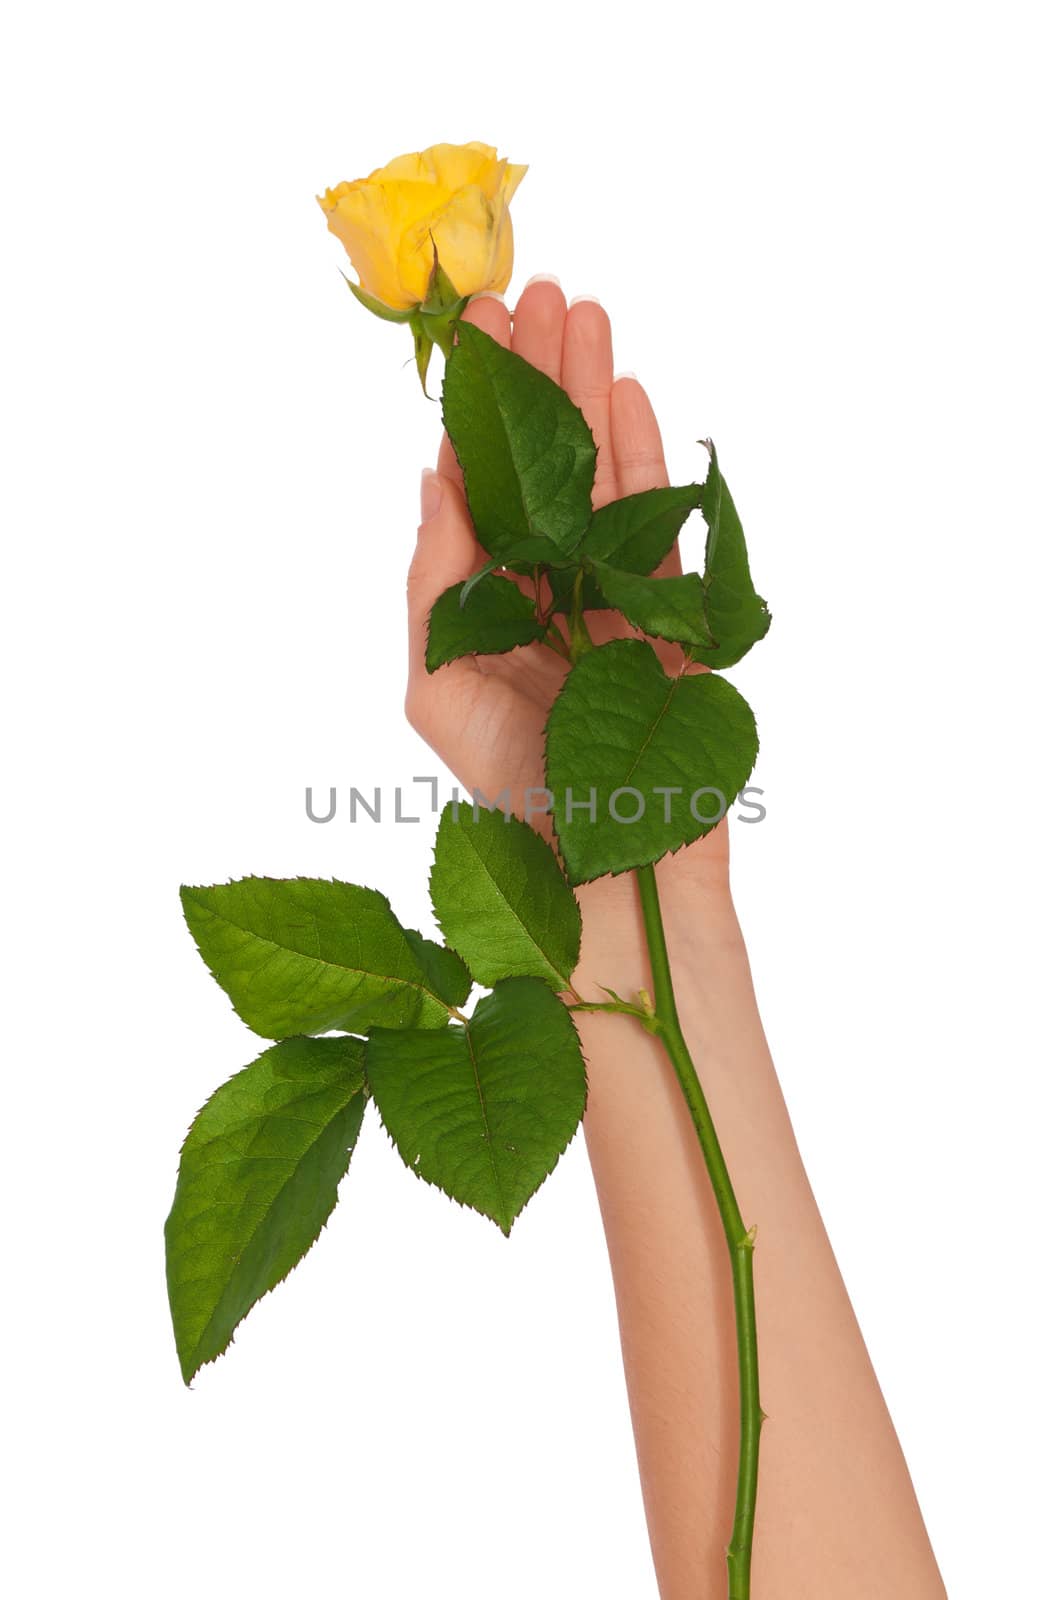 woman holding yellow rose in the hands as a gift